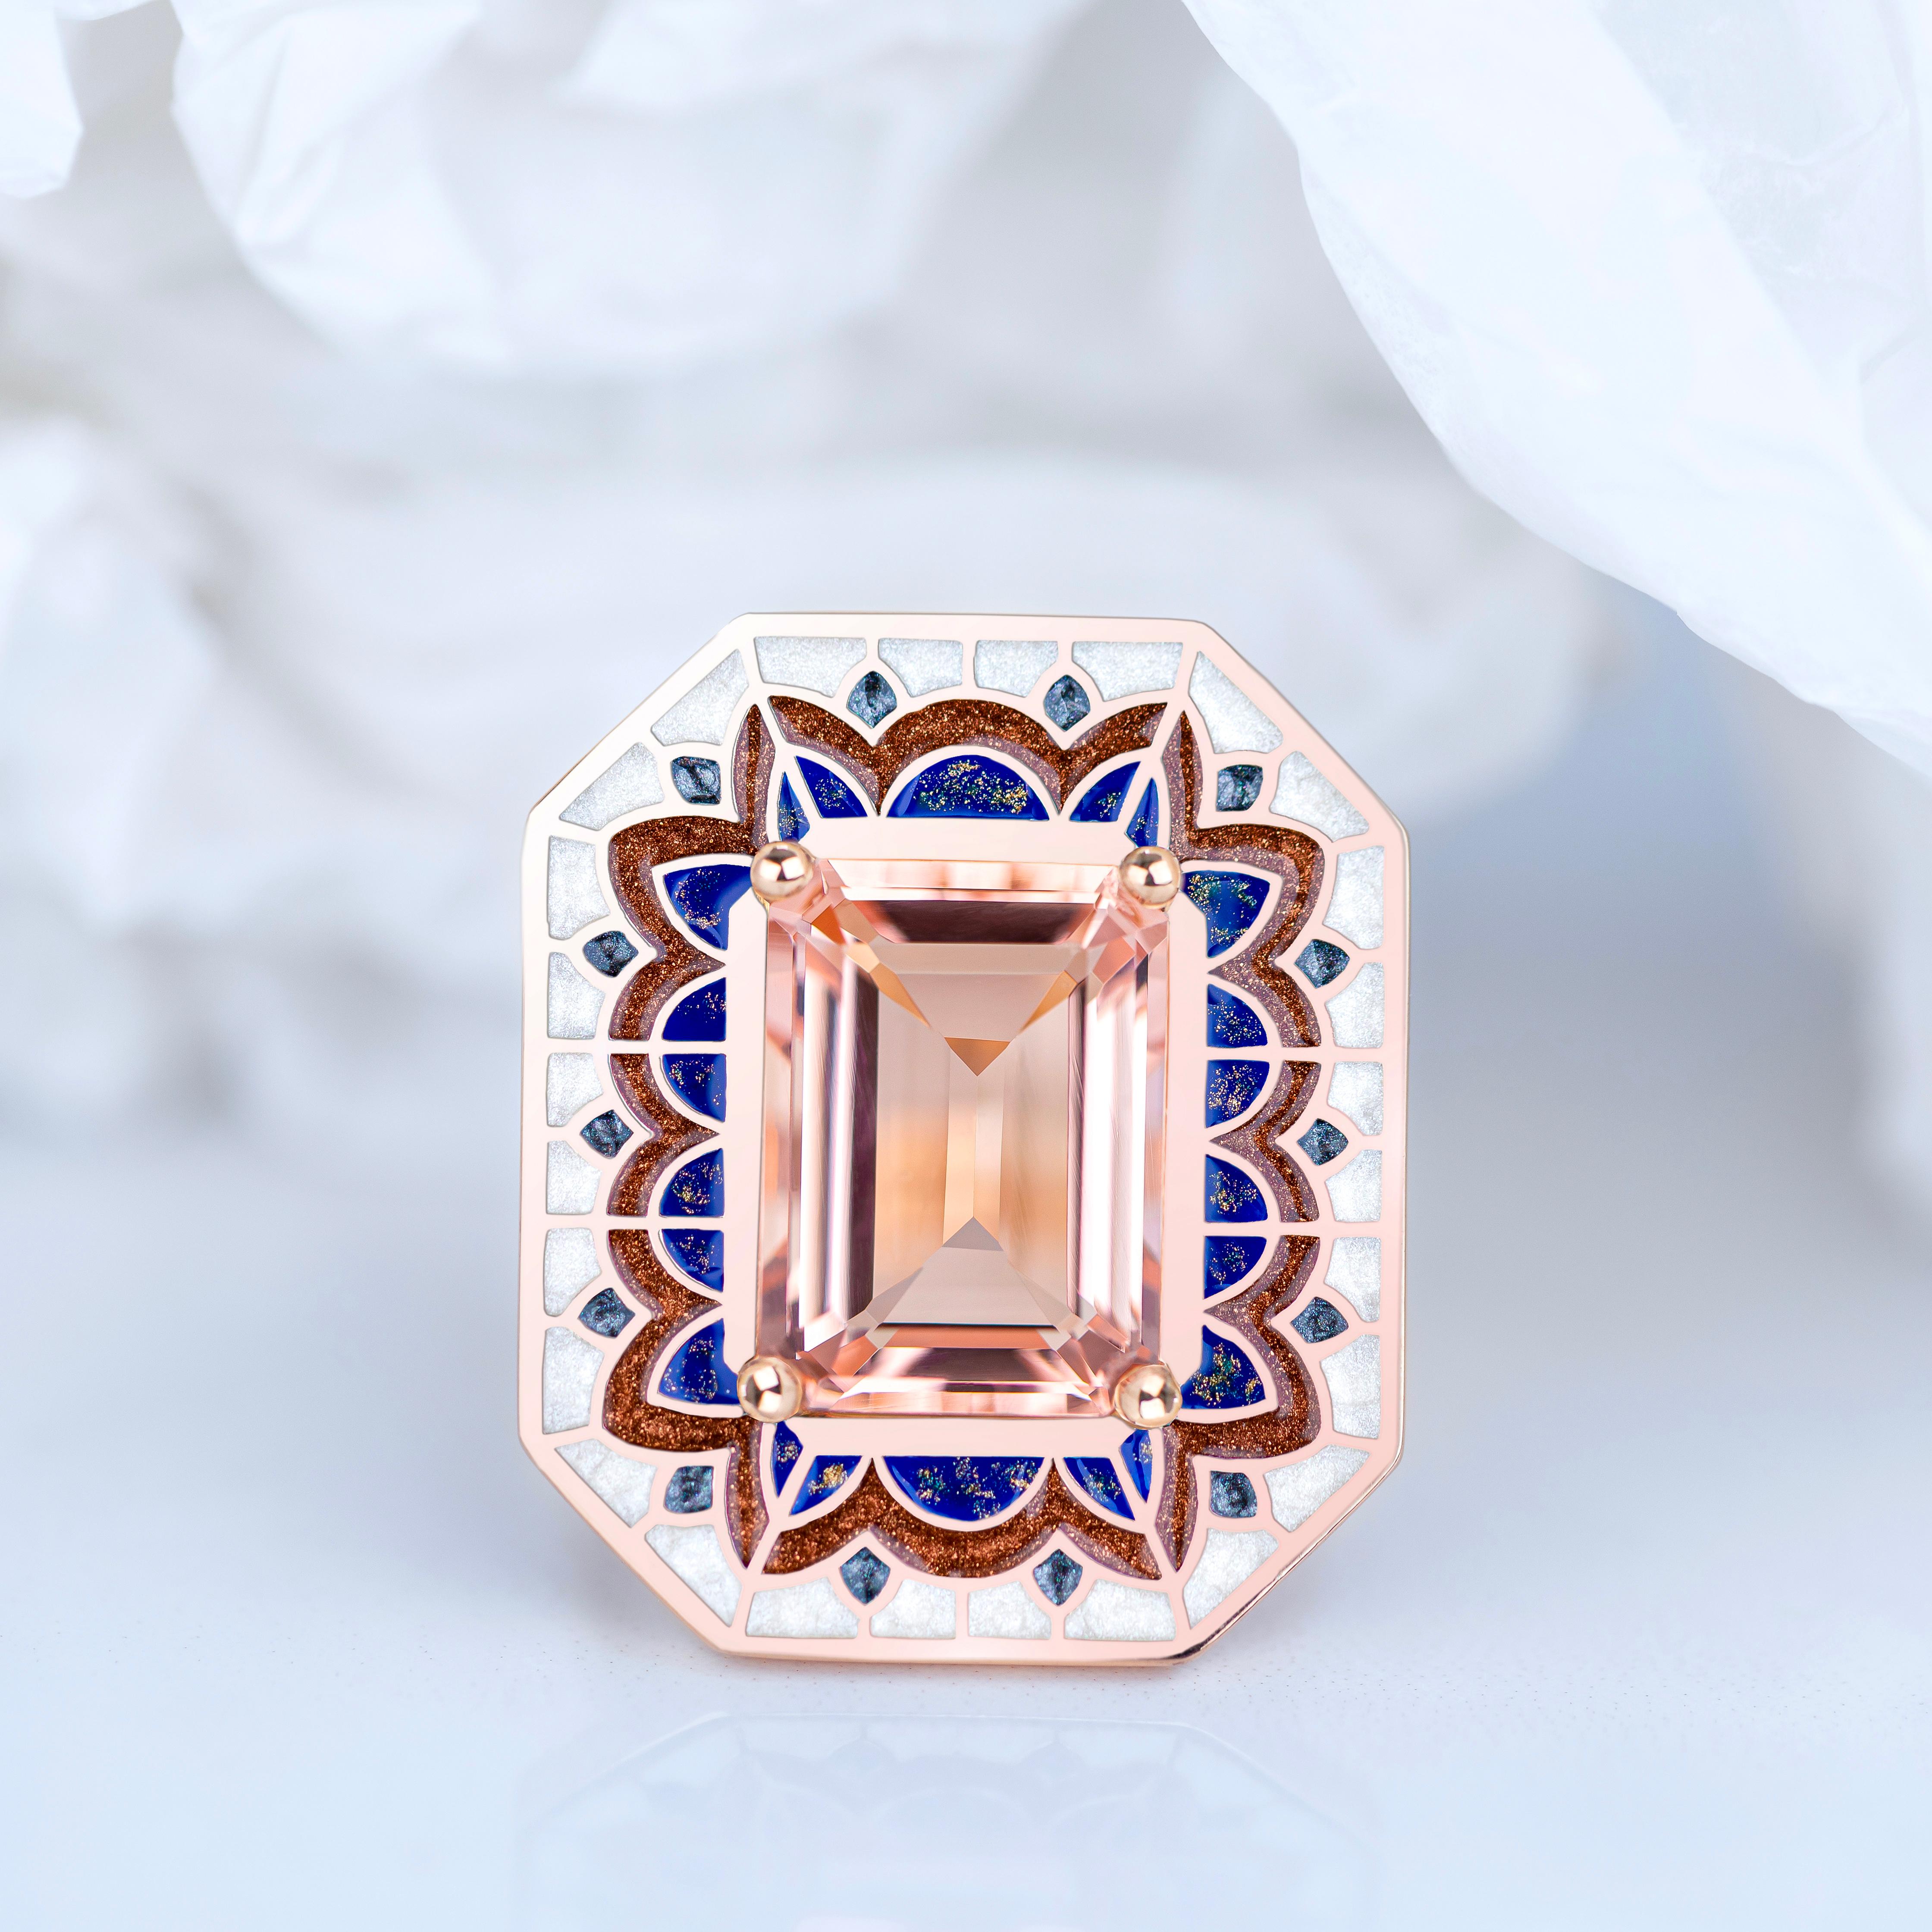 Art Deco Ring, 6.00-7.00 Ct Morganite Stone and Colorful Enamel Ring, 14K Gold Cocktail Ring or 925 Sterling Silver, Seljuk Collection Rings

This ring was made with quality materials and excellent handwork. I guarantee the quality assurance of my